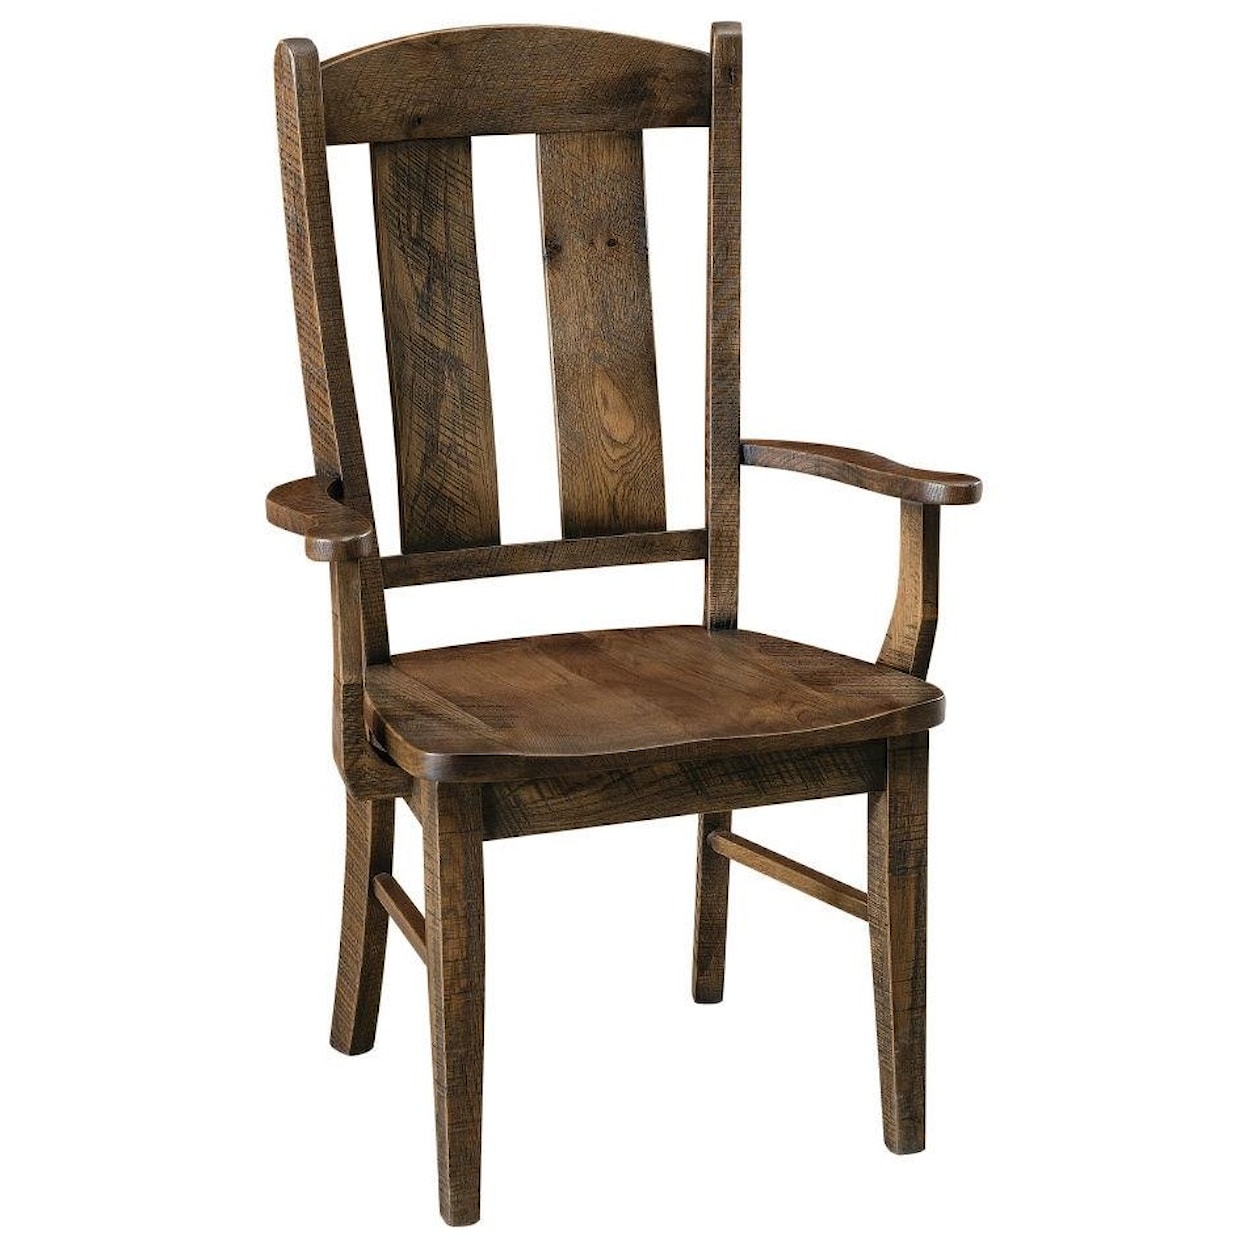 F&N Woodworking Gayle Arm Chair